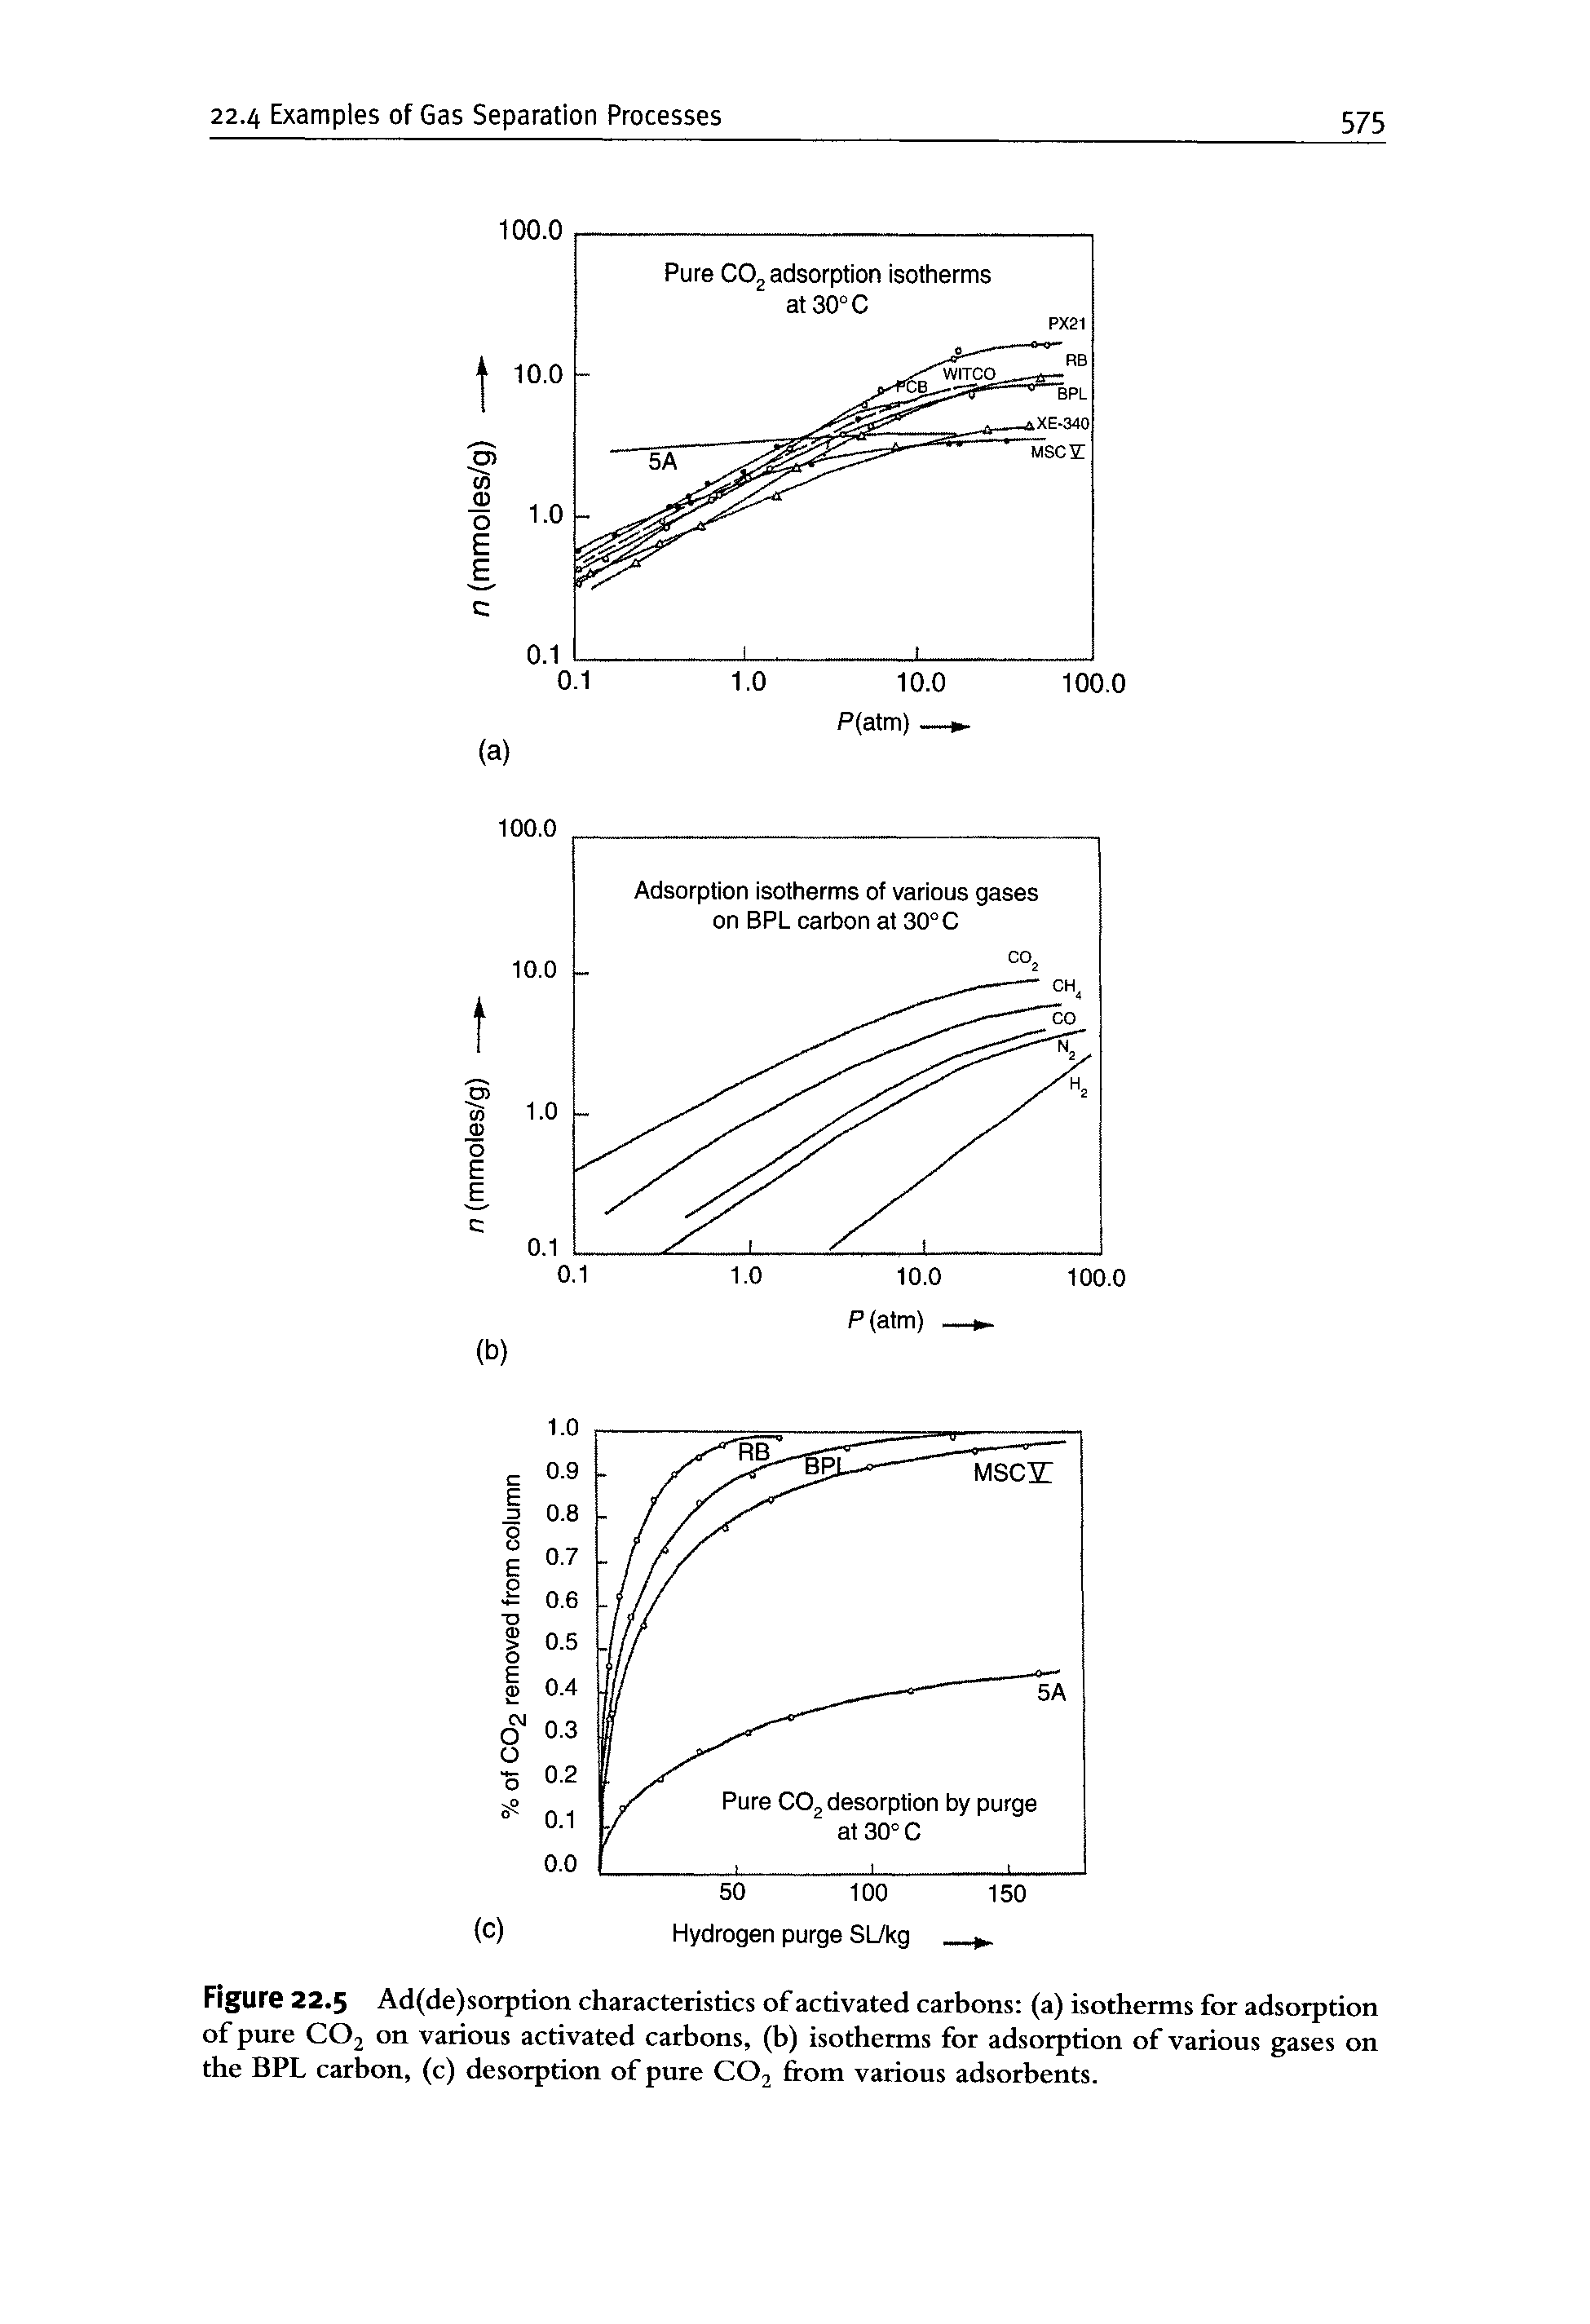 Figure 22.5 Ad(de)sorption characteristics of activated carbons (a) isotherms for adsorption of pure COj on various activated carbons, (b) isotherms for adsorption of various gases on the BPL carbon, (c) desorption of pure COj from various adsorbents.